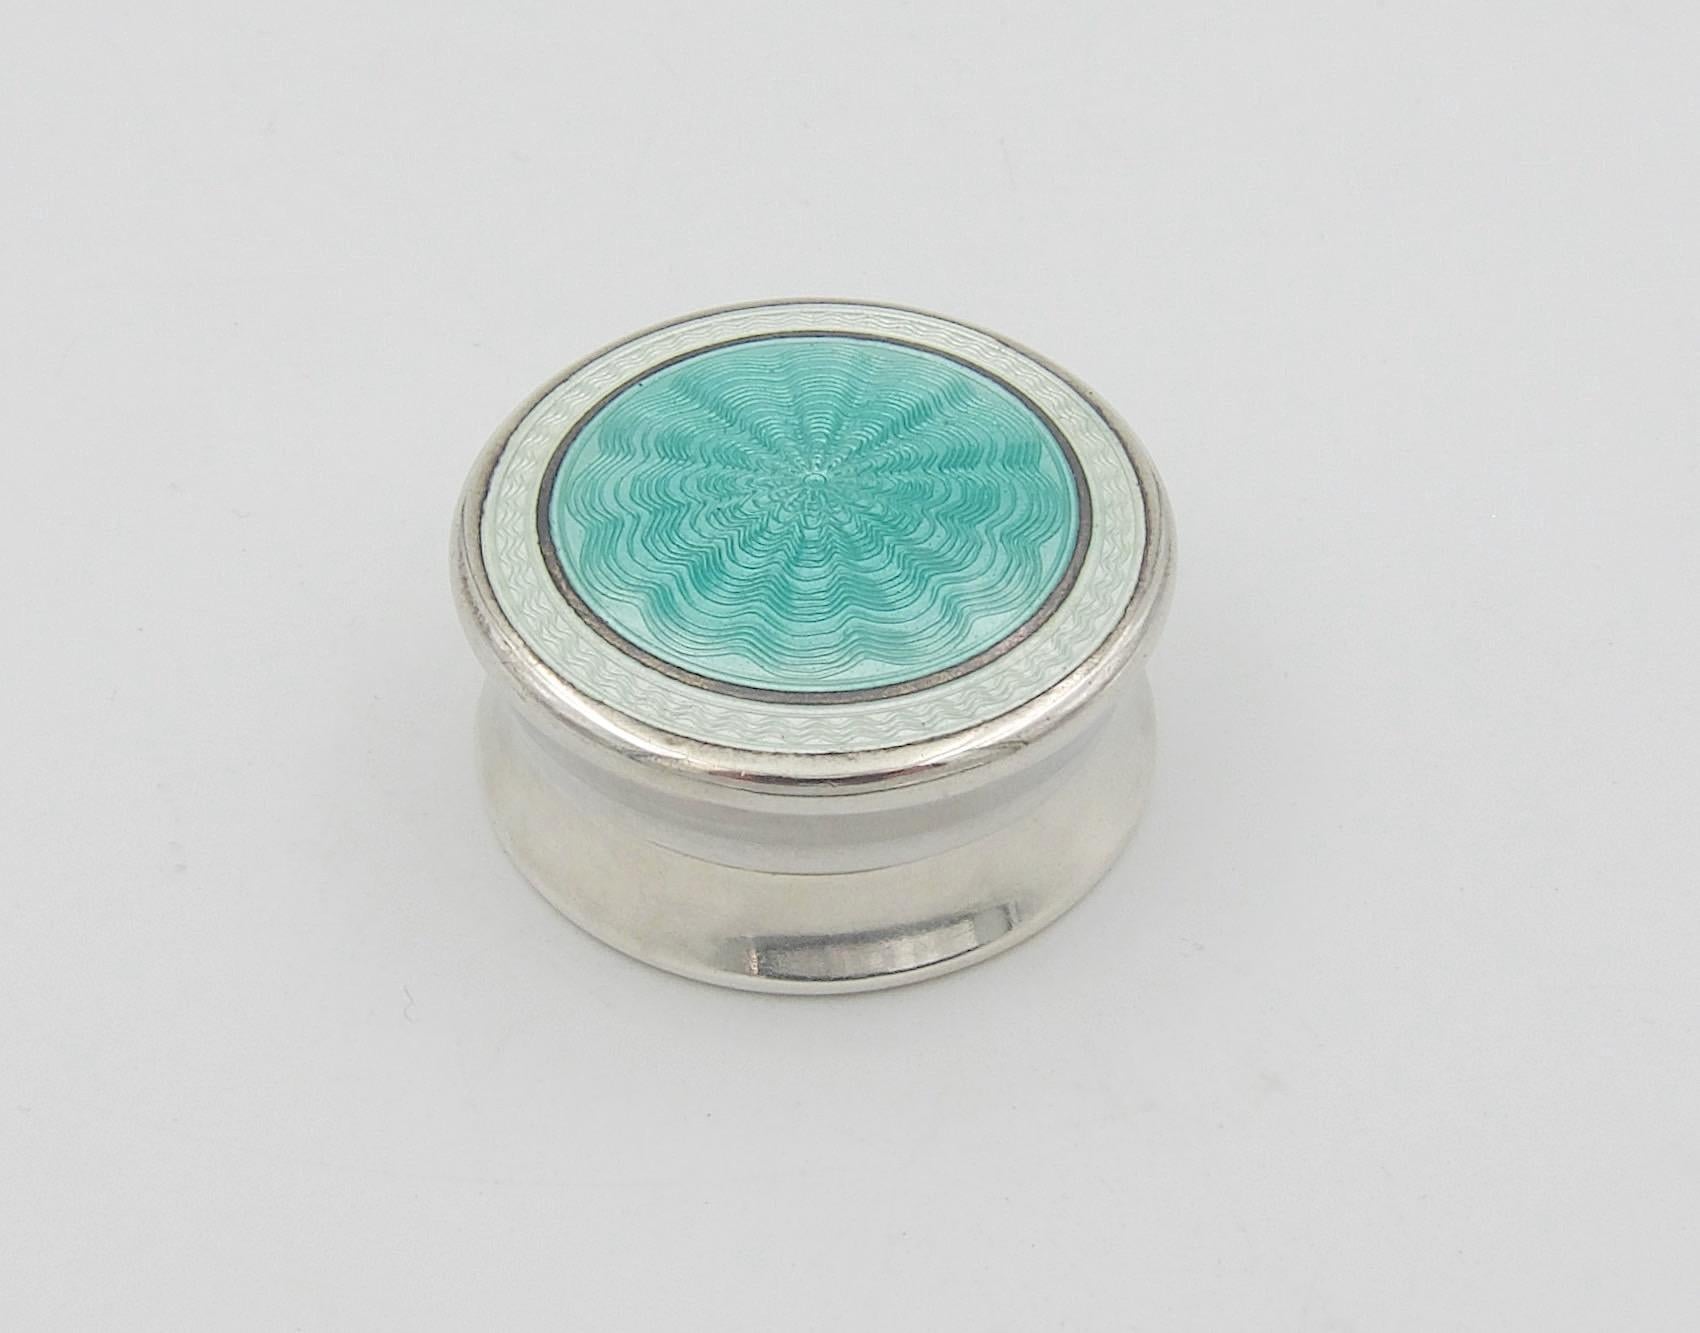 Edwardian English Sterling Silver Pill Box with Guilloche Enamel Lid by H. V. Pithey & Co.